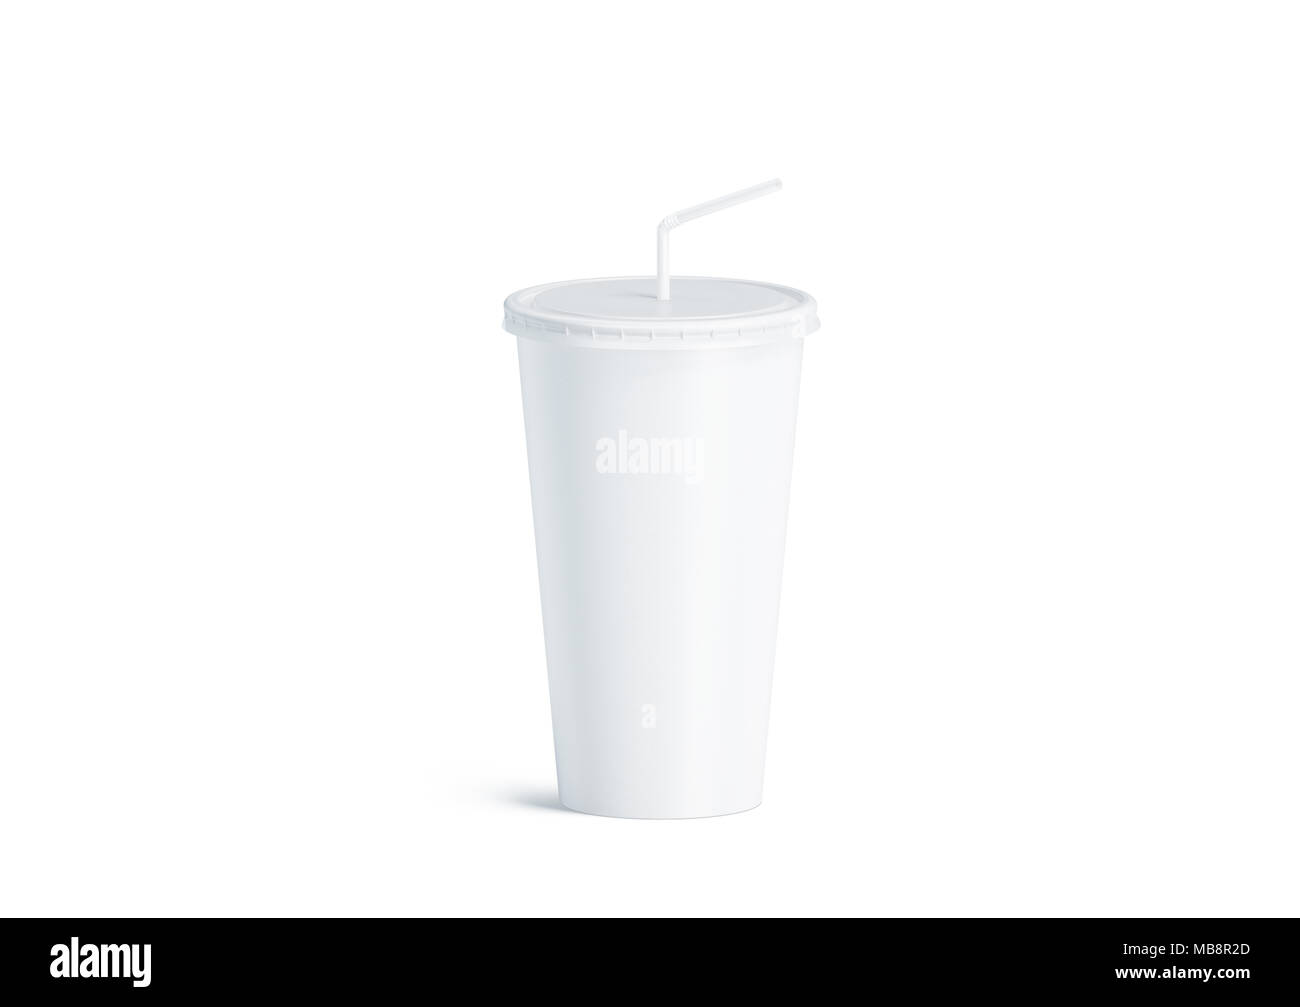 https://c8.alamy.com/comp/MB8R2D/blank-white-disposable-cup-with-straw-mock-up-isolated-3d-rendering-empty-paper-soda-drinking-mug-mockup-with-lid-and-tube-front-view-clear-soft-drink-cola-take-away-plastic-package-MB8R2D.jpg